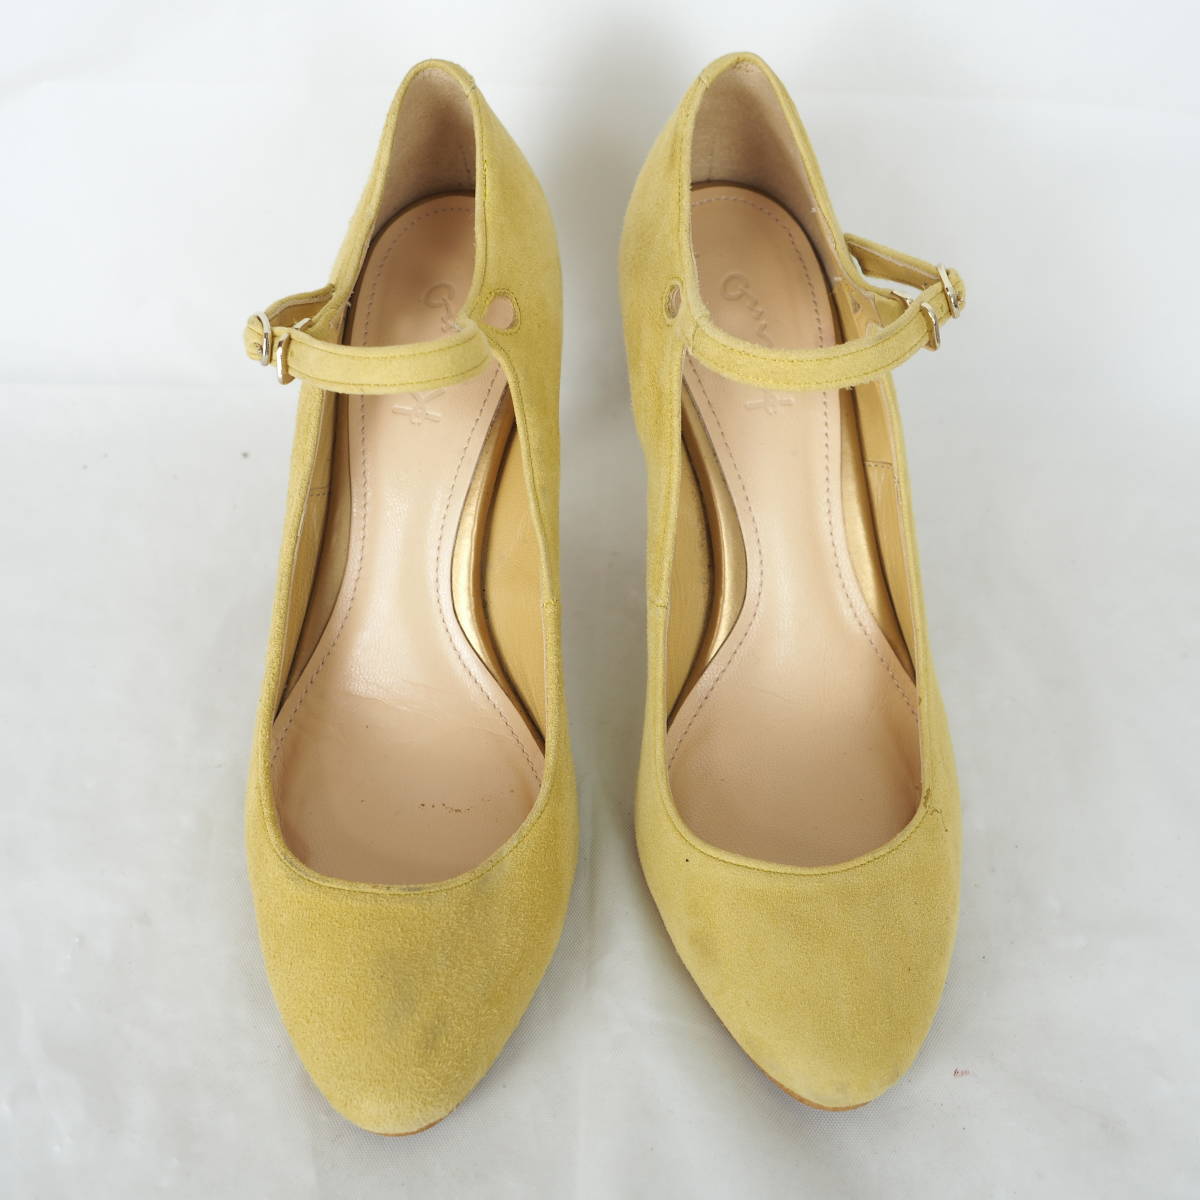 MK2057* lady's pumps *36-23cm* yellow color * made in Japan 